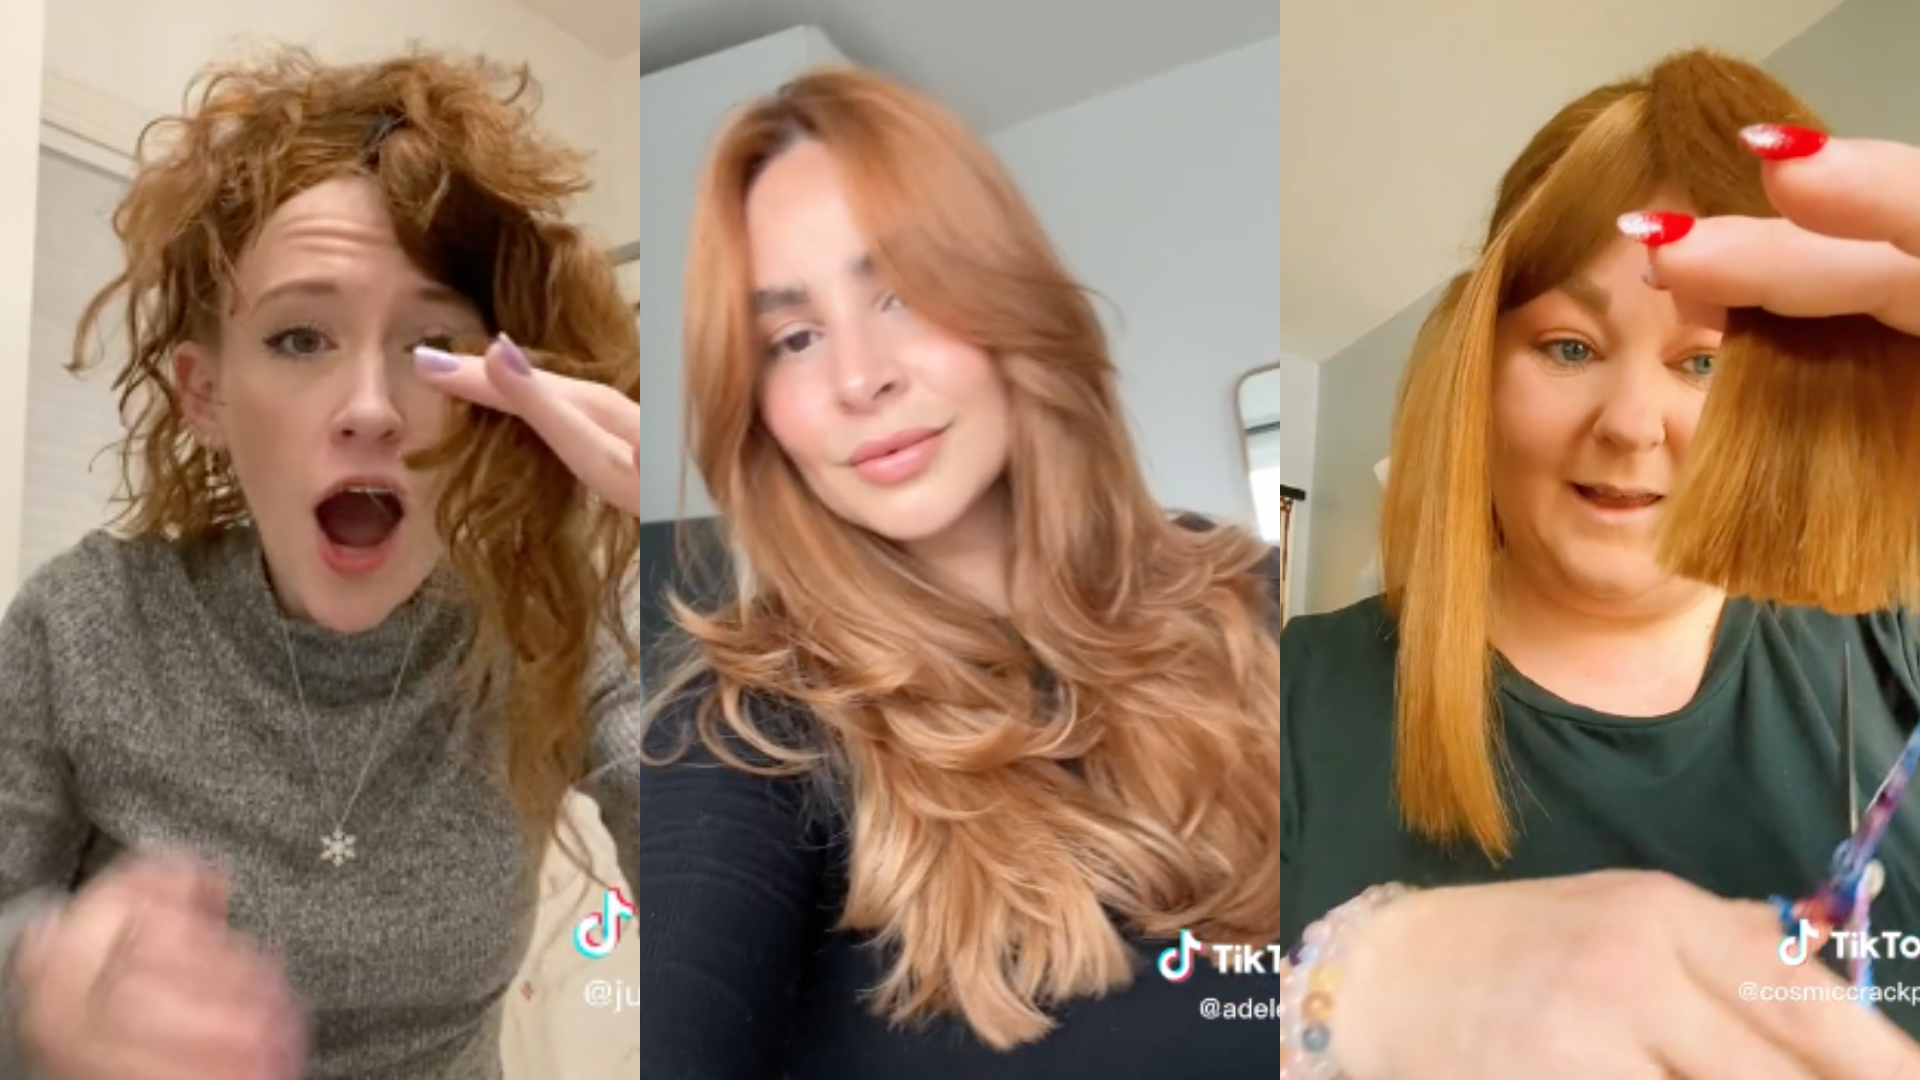 TikTok’s “Butterfly Cut” Involves Cutting Your Own Hair: Would You Do This?